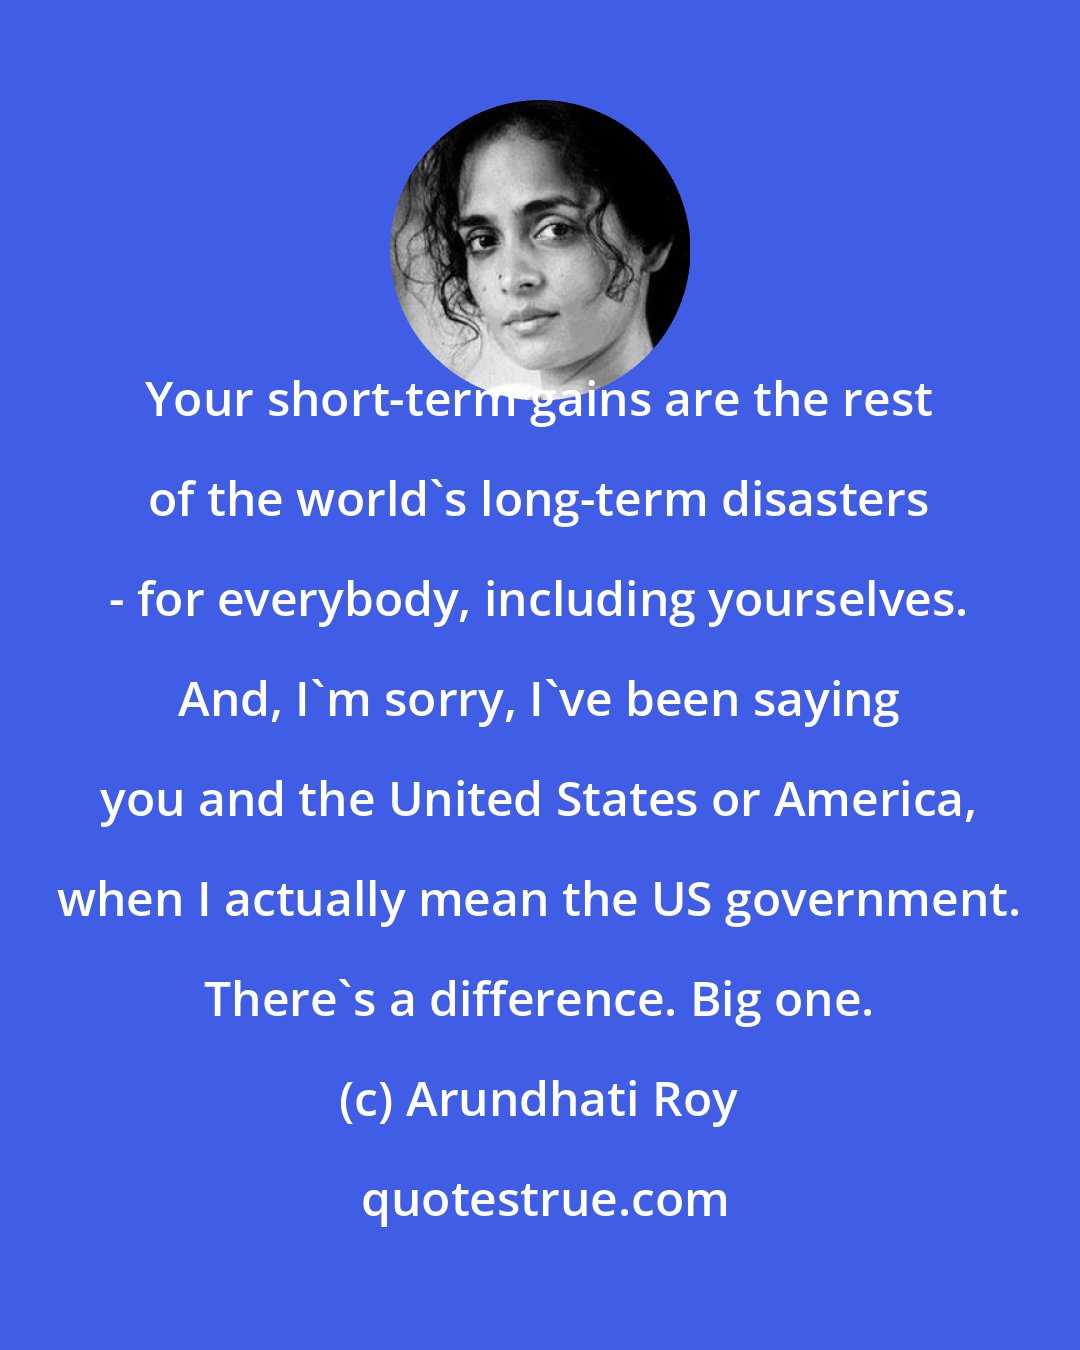 Arundhati Roy: Your short-term gains are the rest of the world's long-term disasters - for everybody, including yourselves. And, I'm sorry, I've been saying you and the United States or America, when I actually mean the US government. There's a difference. Big one.